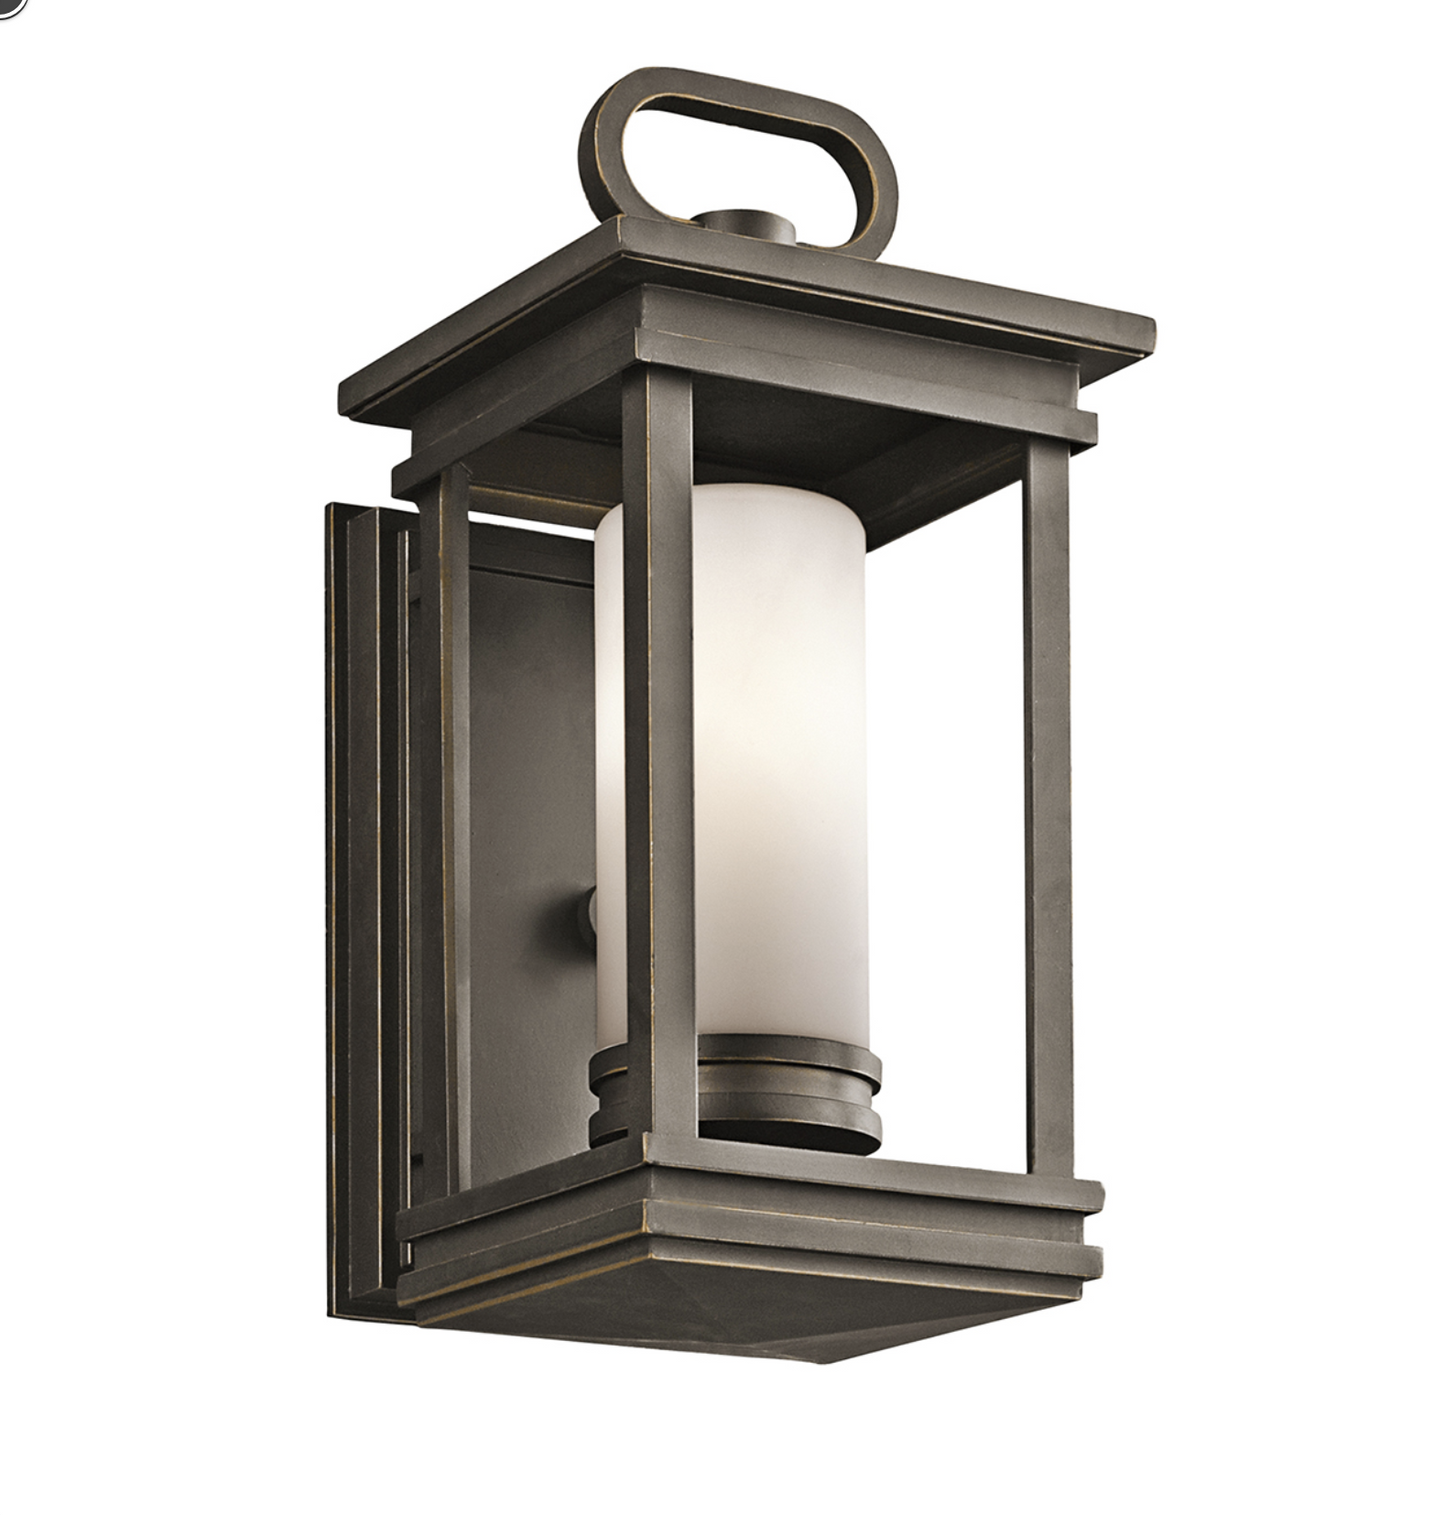 Customs House Rectangular Exterior Wall Lantern Finished In Bronze - ID 6746